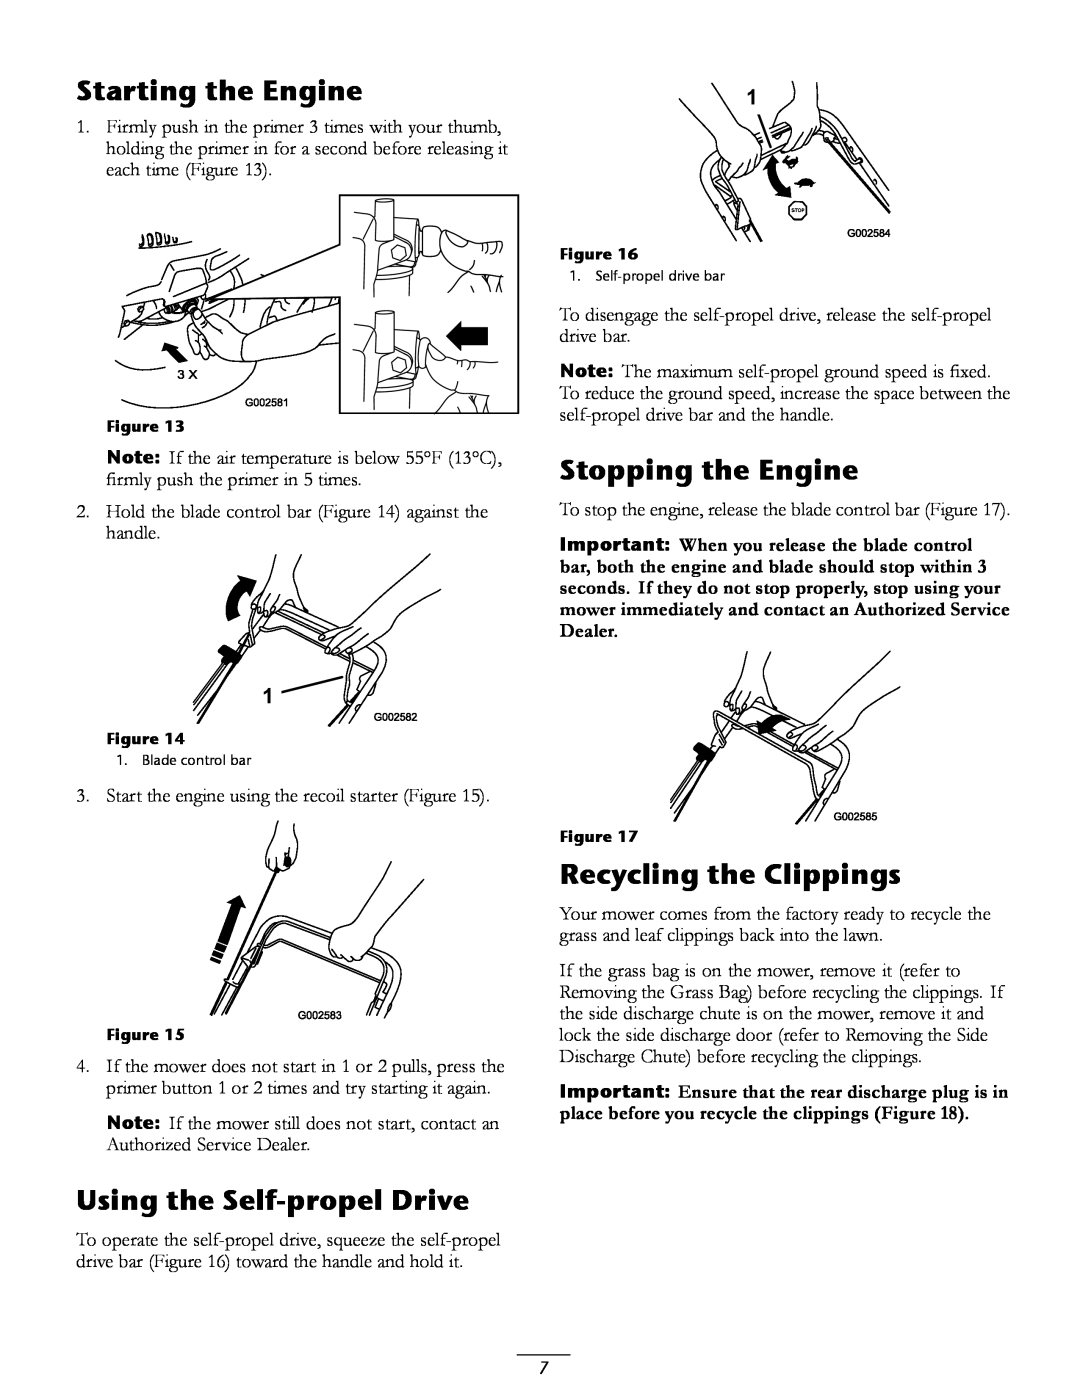 Toro 20016 owner manual Starting the Engine, Stopping the Engine, Using the Self-propelDrive, Recycling the Clippings 